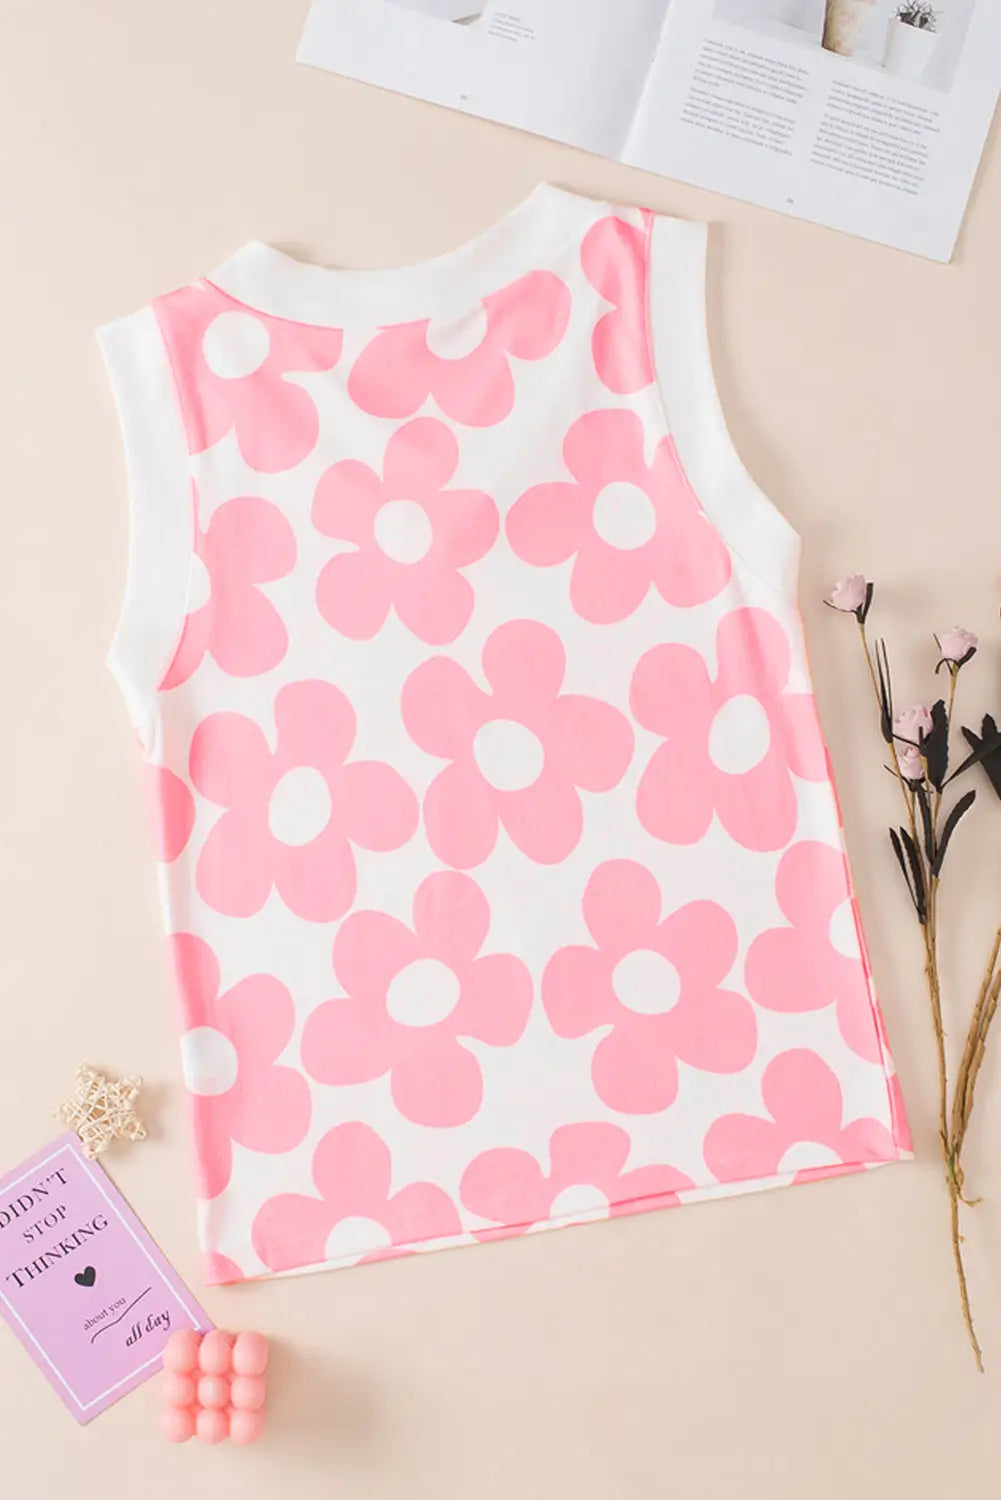 Pink cute flower knitted tank top - tops